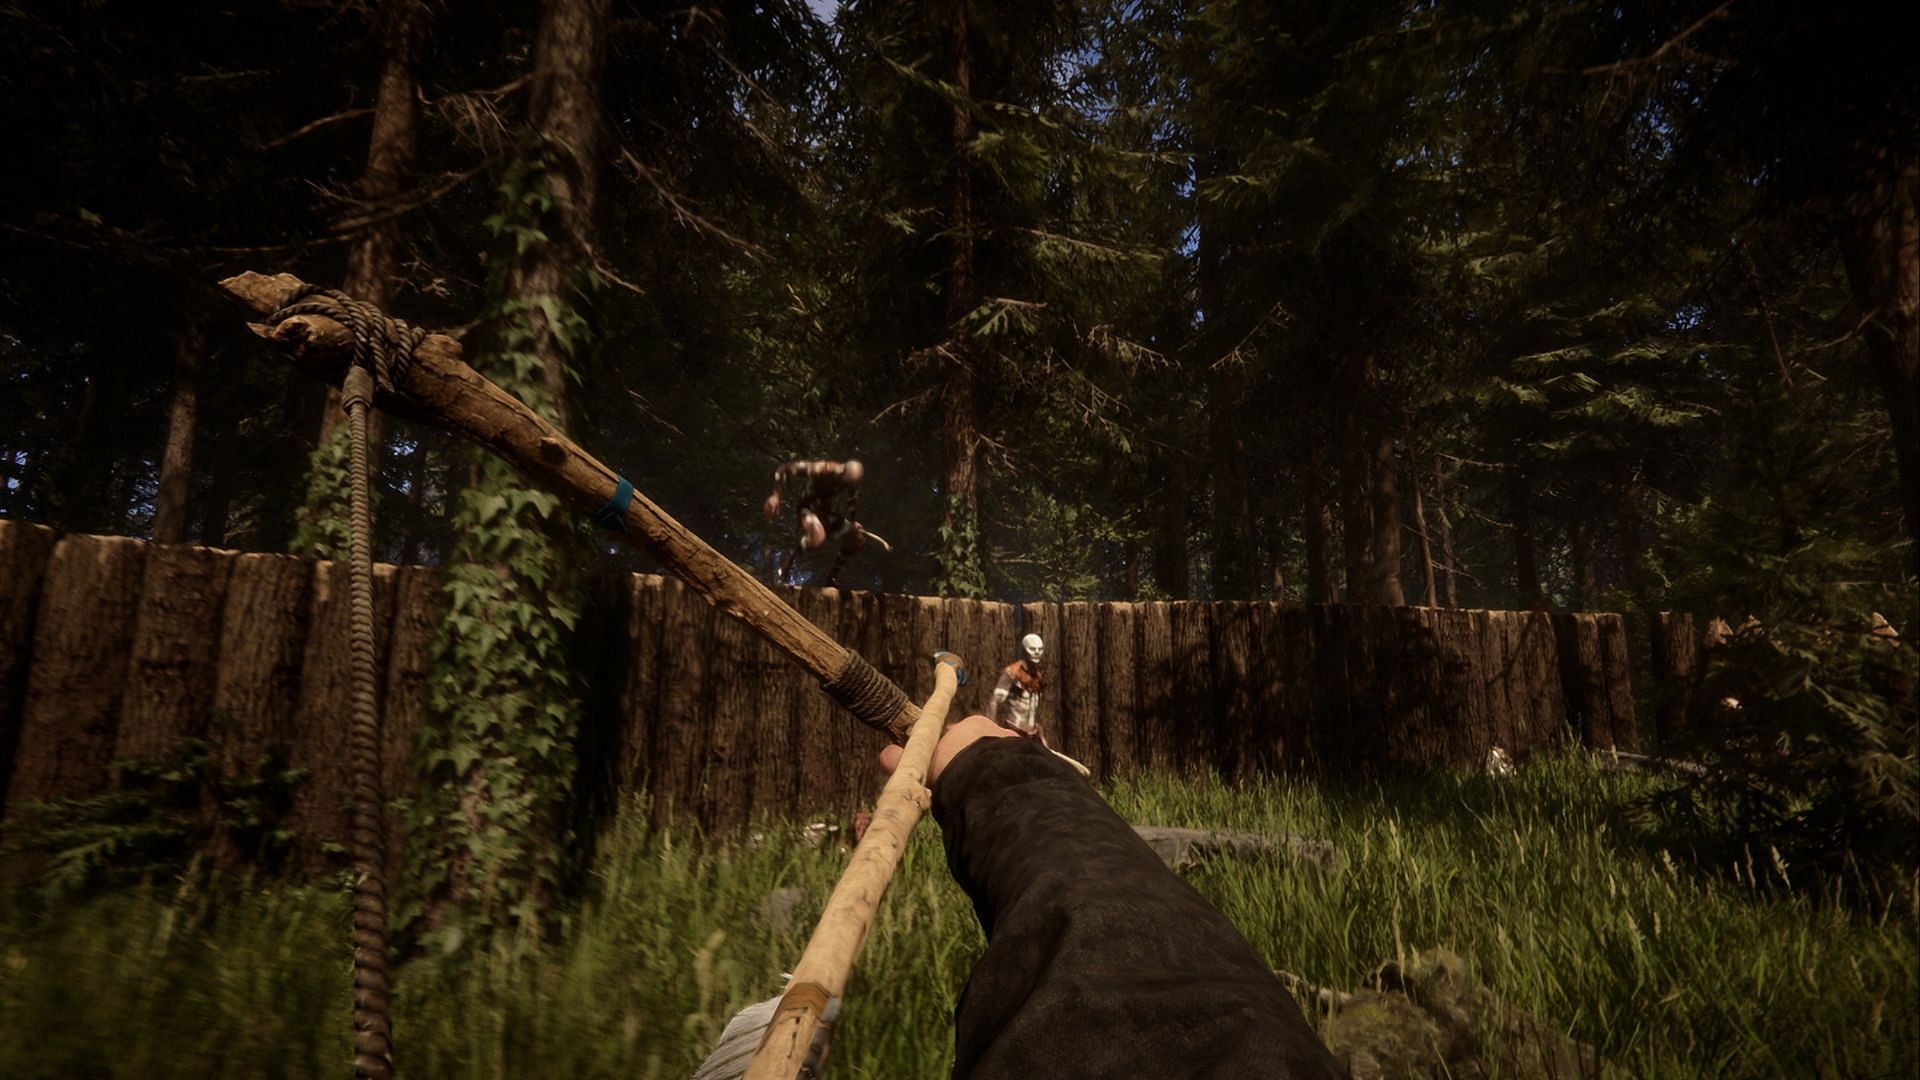 Sons of the Forest brings update patch 02. Here's all you need to